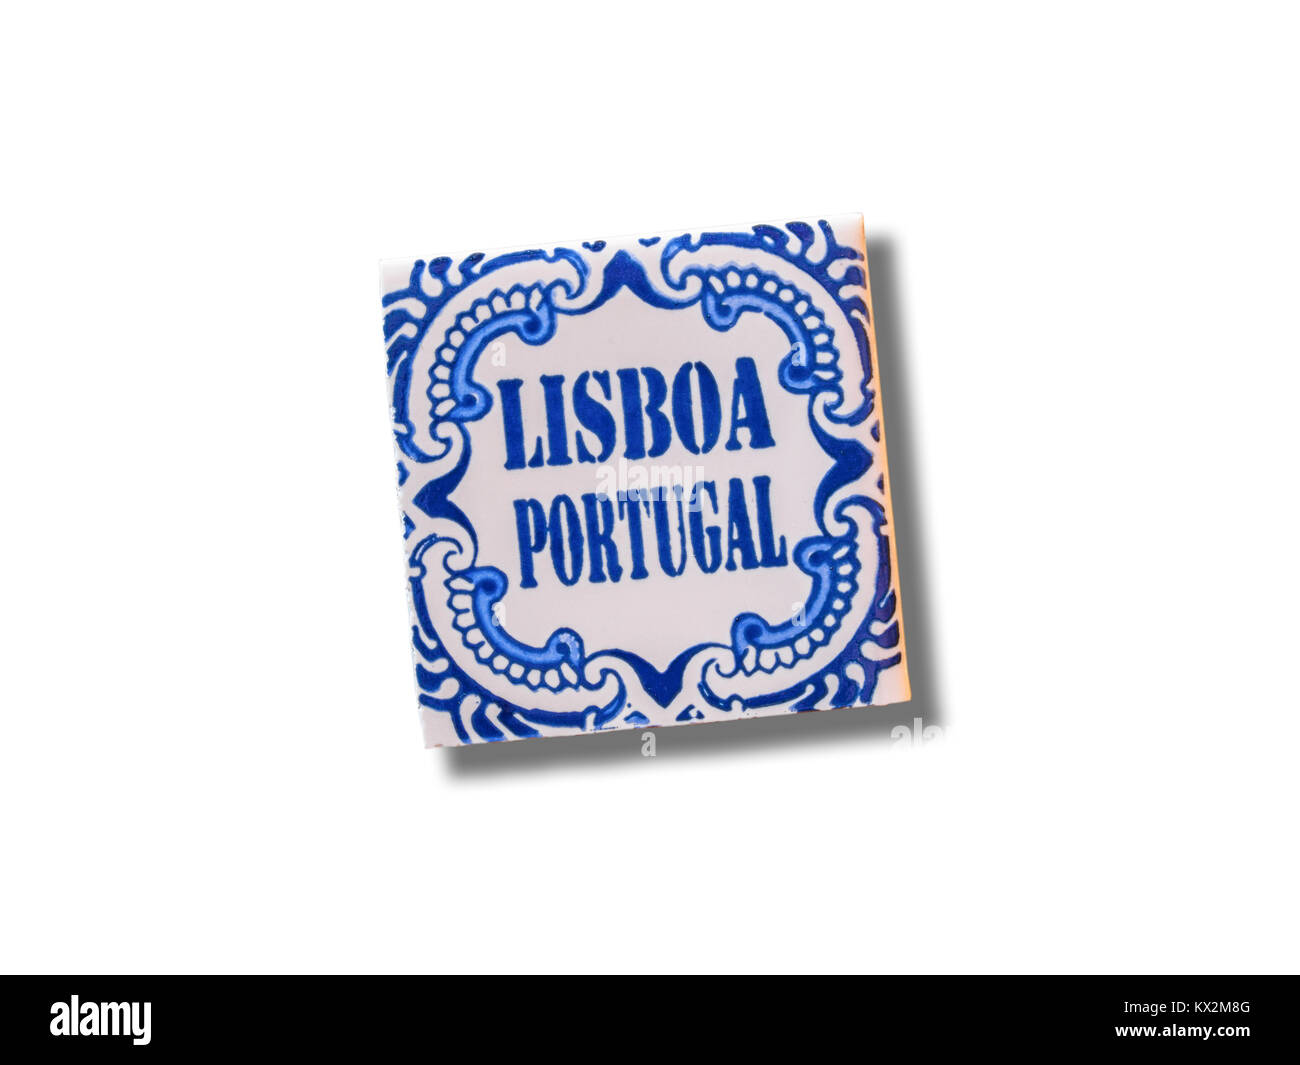 Lisbon (Portugal) souvenir refrigerator magnet isolated on white background Stock Photo